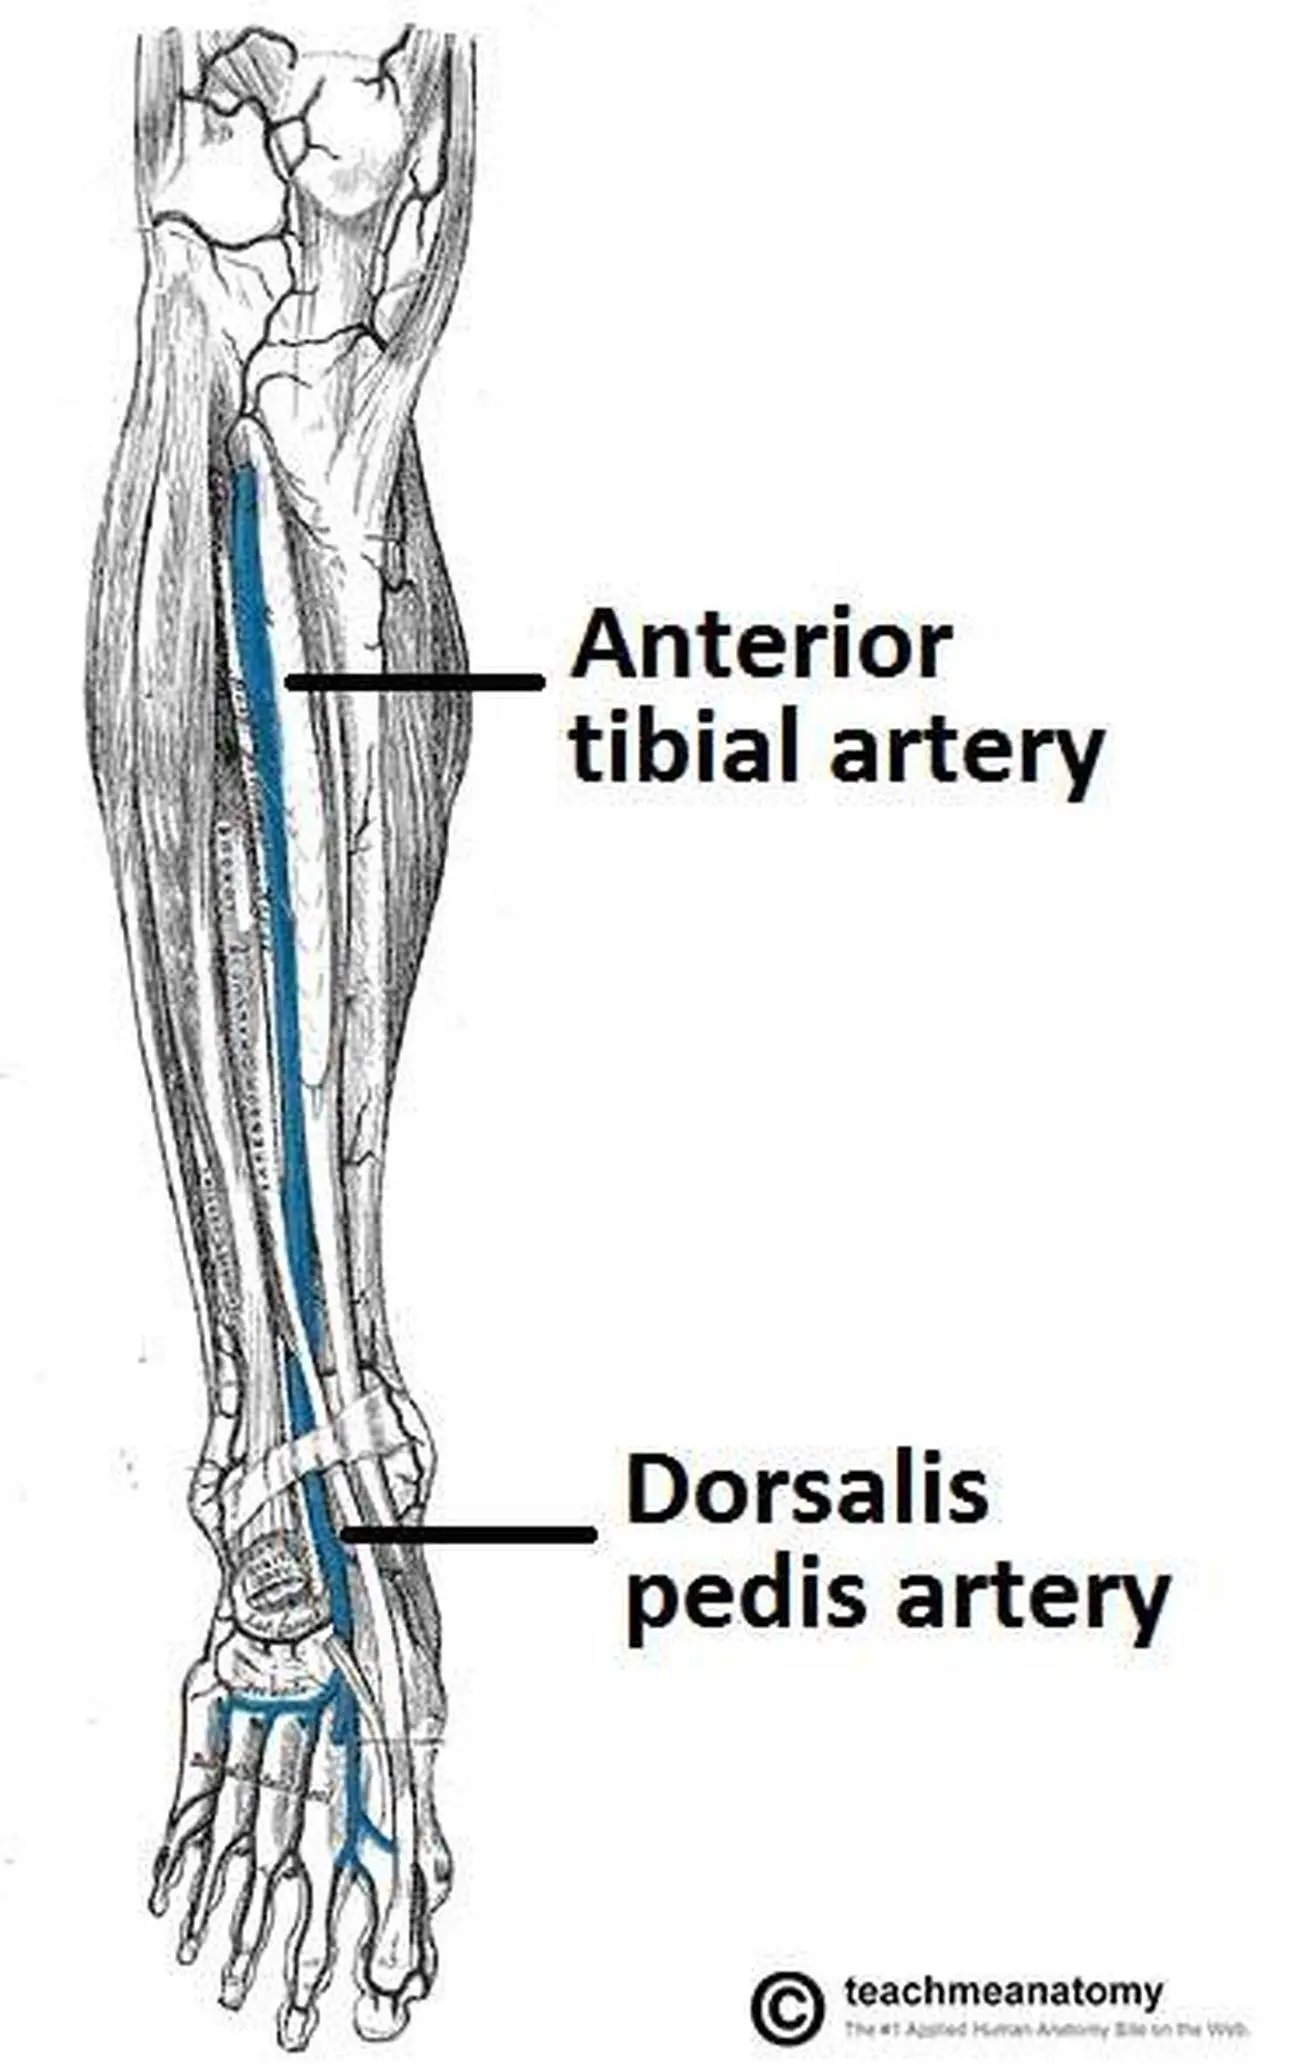 Pictures Of Anterior Tibial Artery